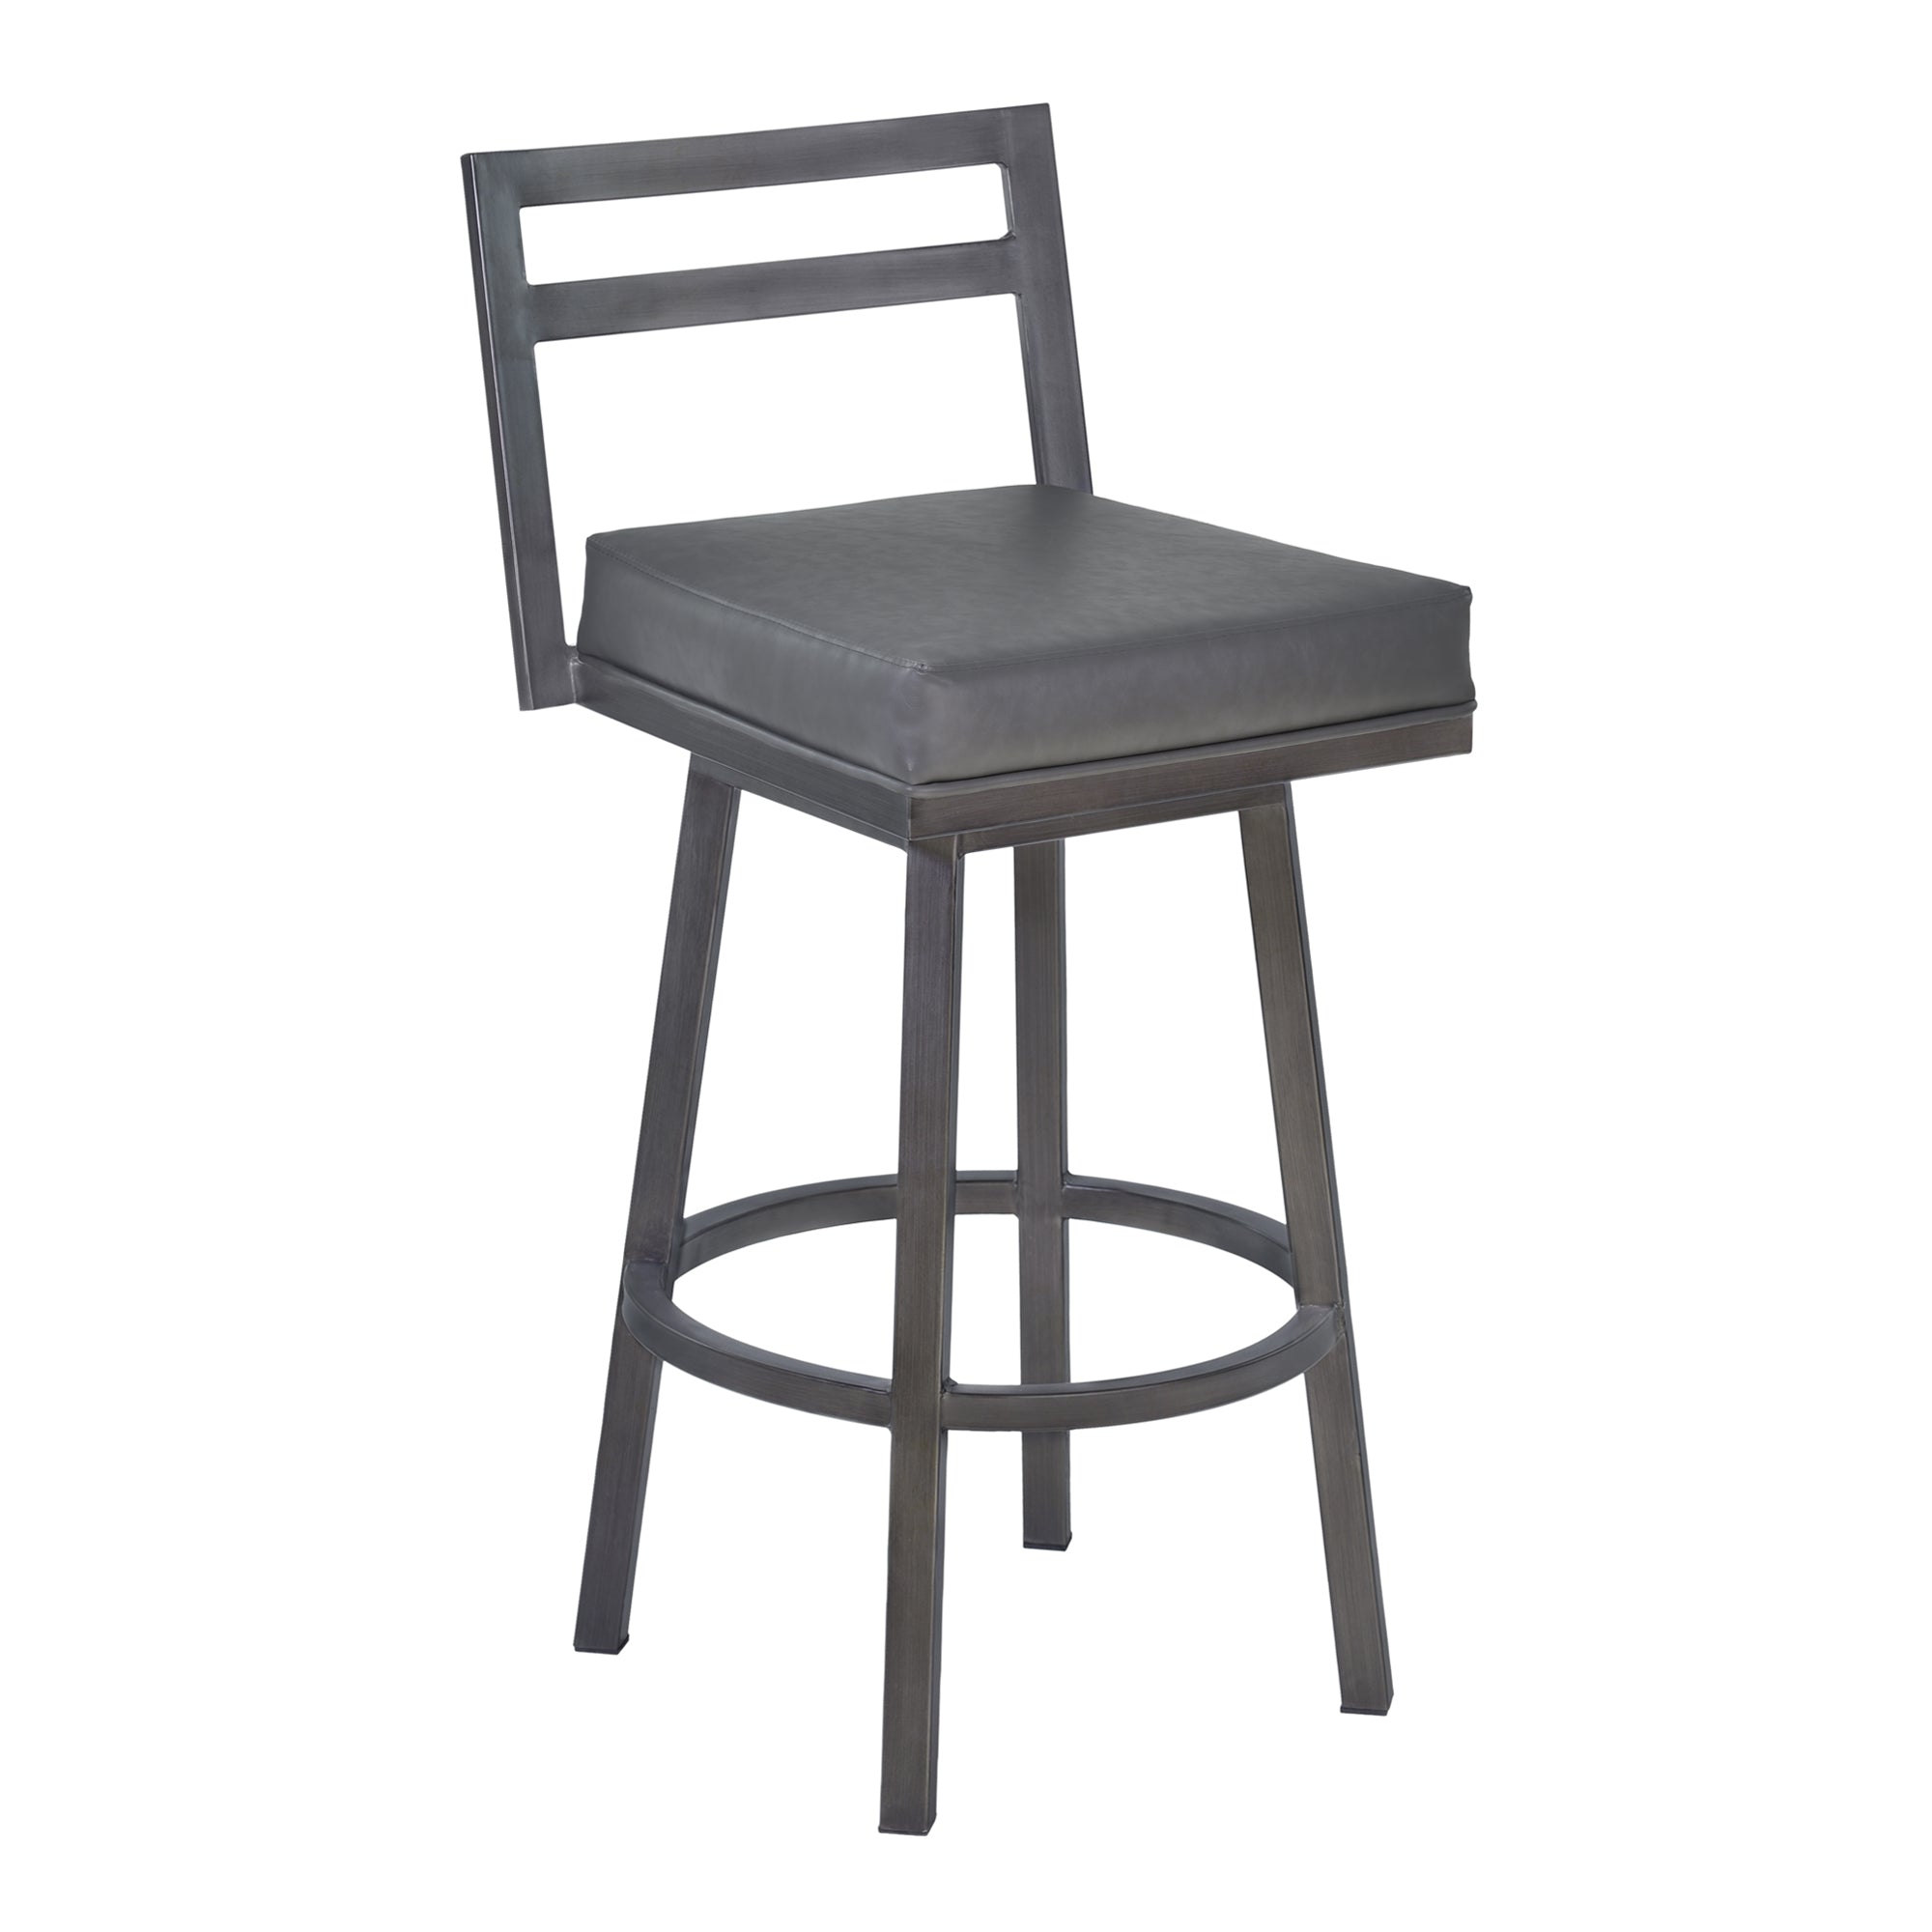 Armen Living LCMOBAVG26 Moniq 26 Counter Height Metal Swivel Barstool in Vintage Grey Faux Leather and Mineral Finish